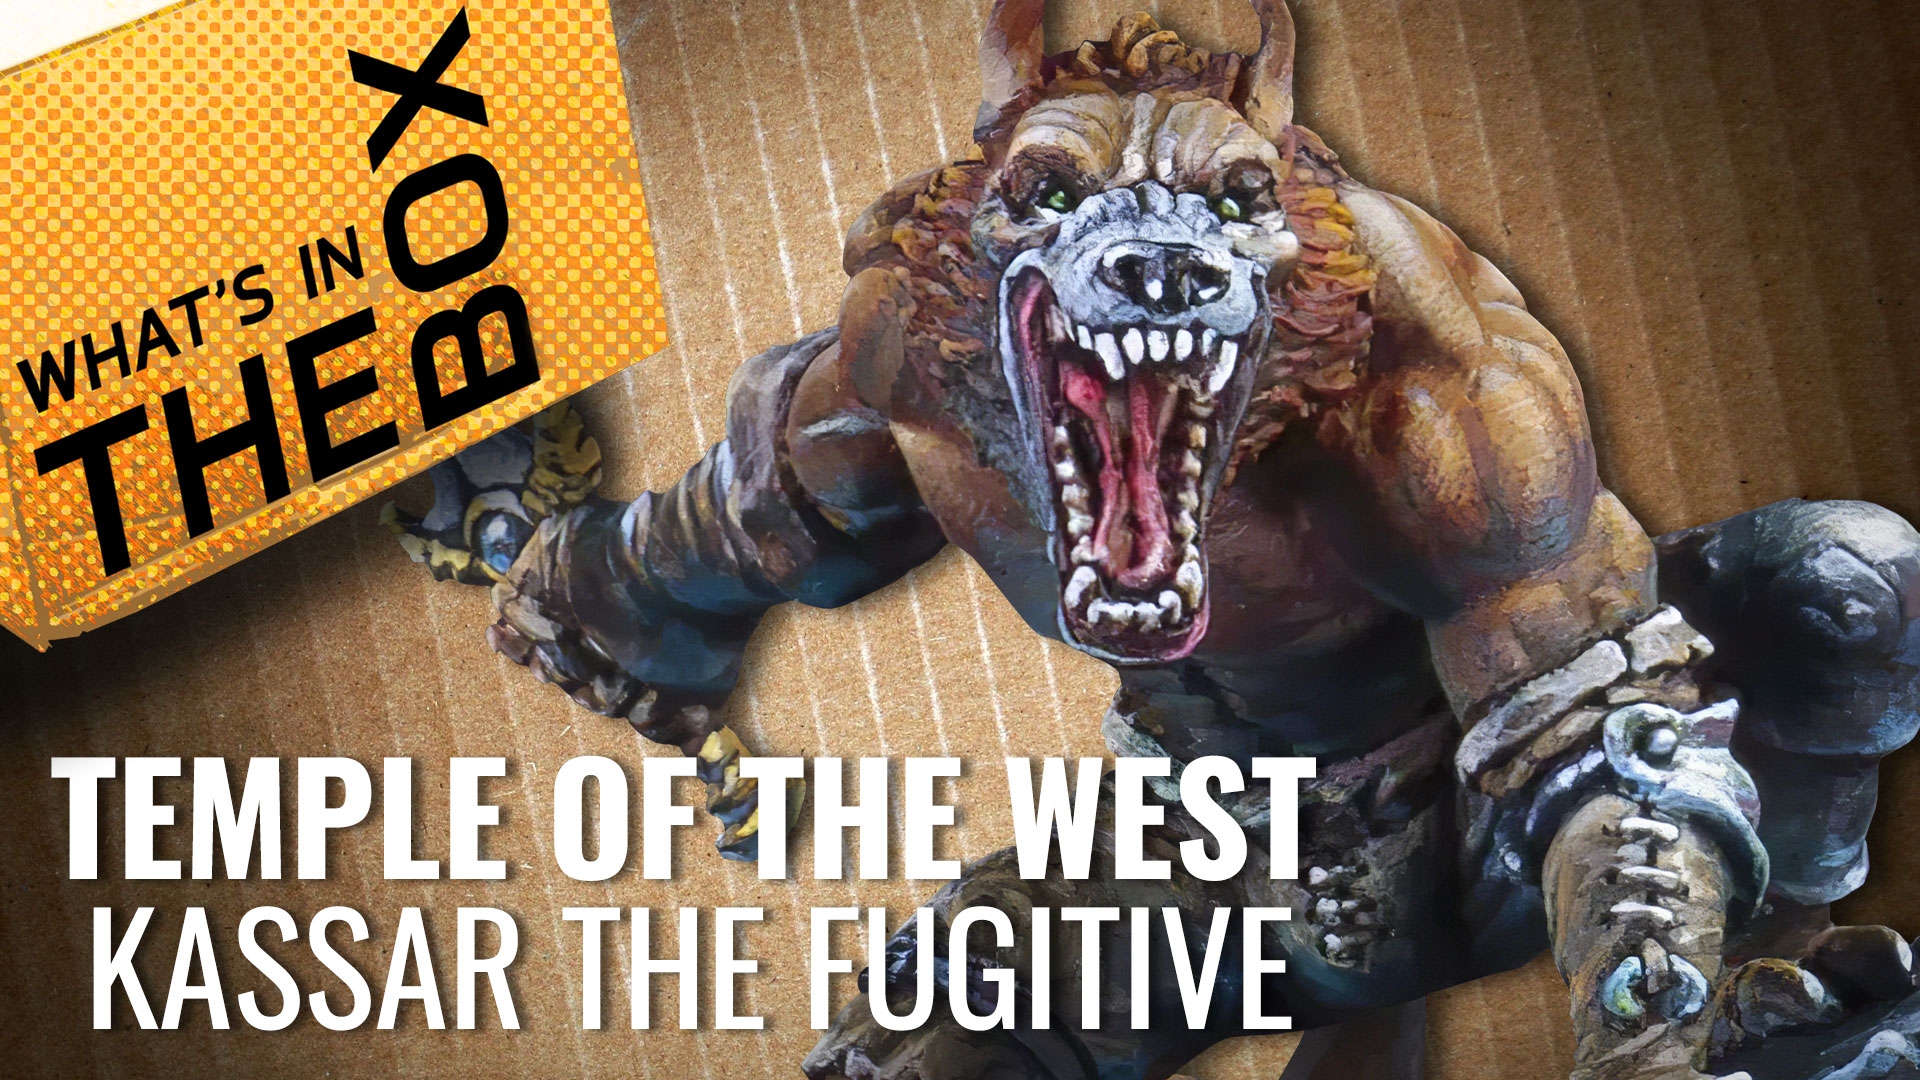 Unboxing-Temple-of-the-West_Kassar-the-Fugitive-coverimage